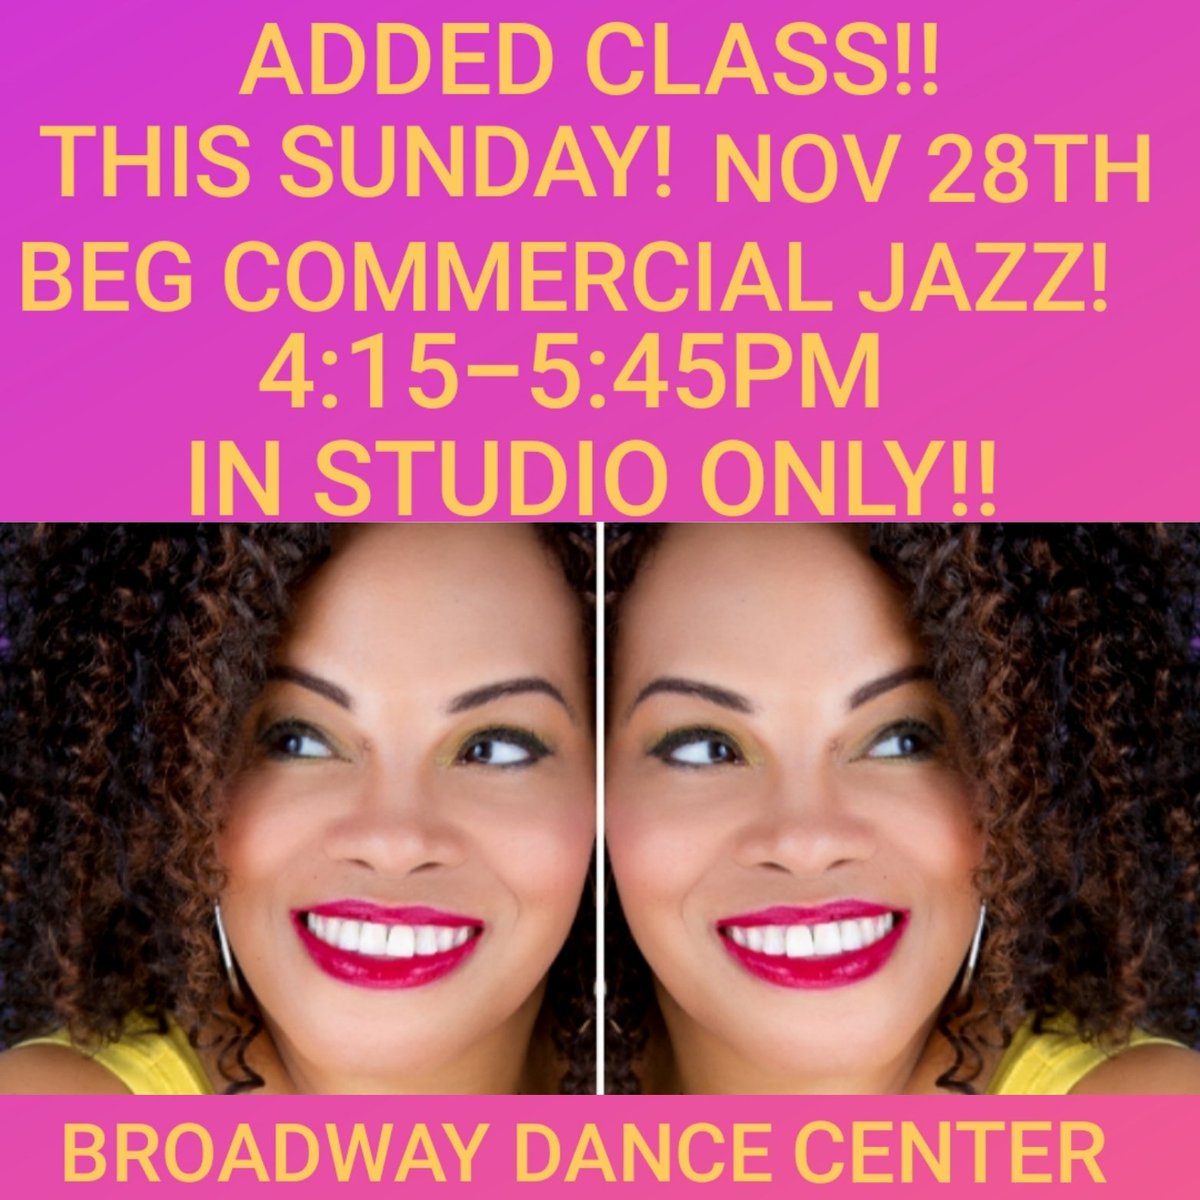 EXTRA CLASS ADDED THIS WEEKEND! Sunday Nov 28th 4:15-5:45pm Beg Commercial Jazz In StudioOnly! @nyc_bdc 
Also teaching Saturday Nov 27th Adv Beg Commercial Jazz 3:15 - 4:45 Hybrid! Go to broadwaydancecenter.com to sign up. See you there. 
📸: @BrianthomasF